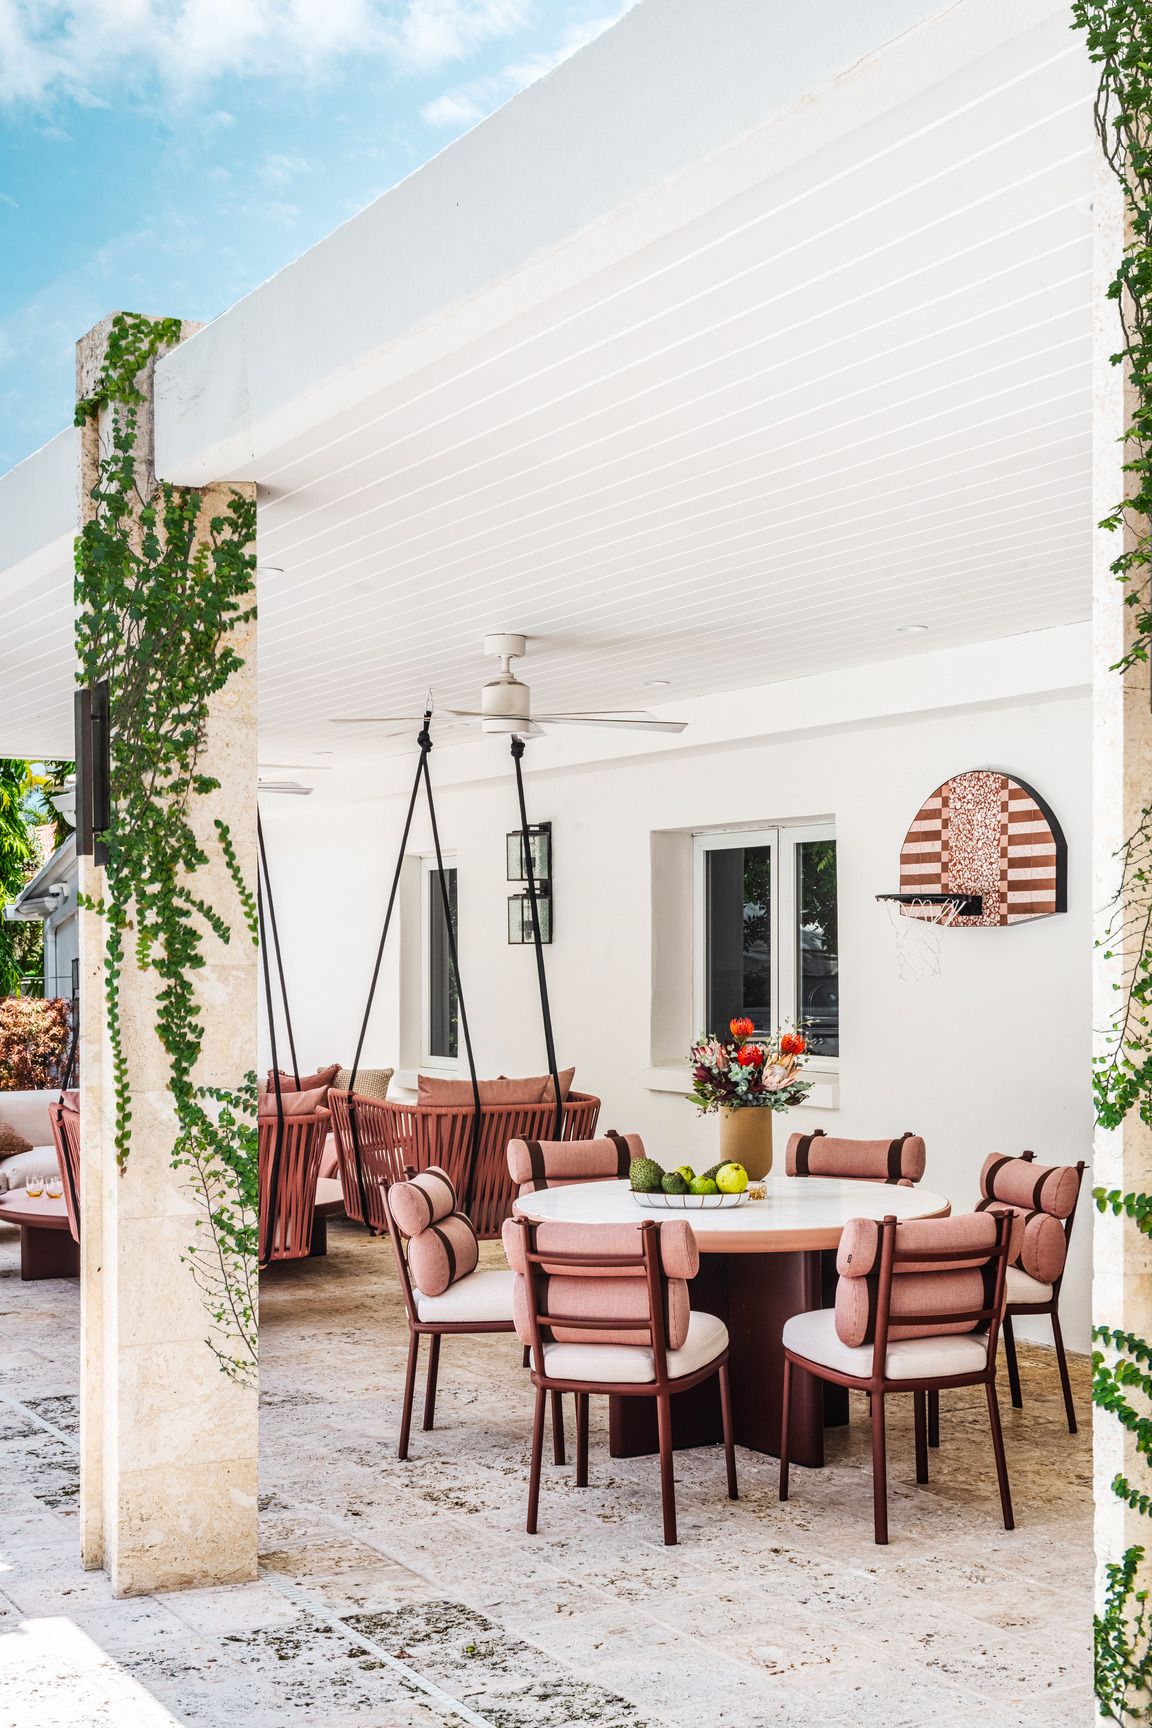 on a limestone patio, moniomi design placed kettal furniture to create a multipurpose area for dining, hanging out, and playing an overhang supported by travertine columns makes it useful in any weather